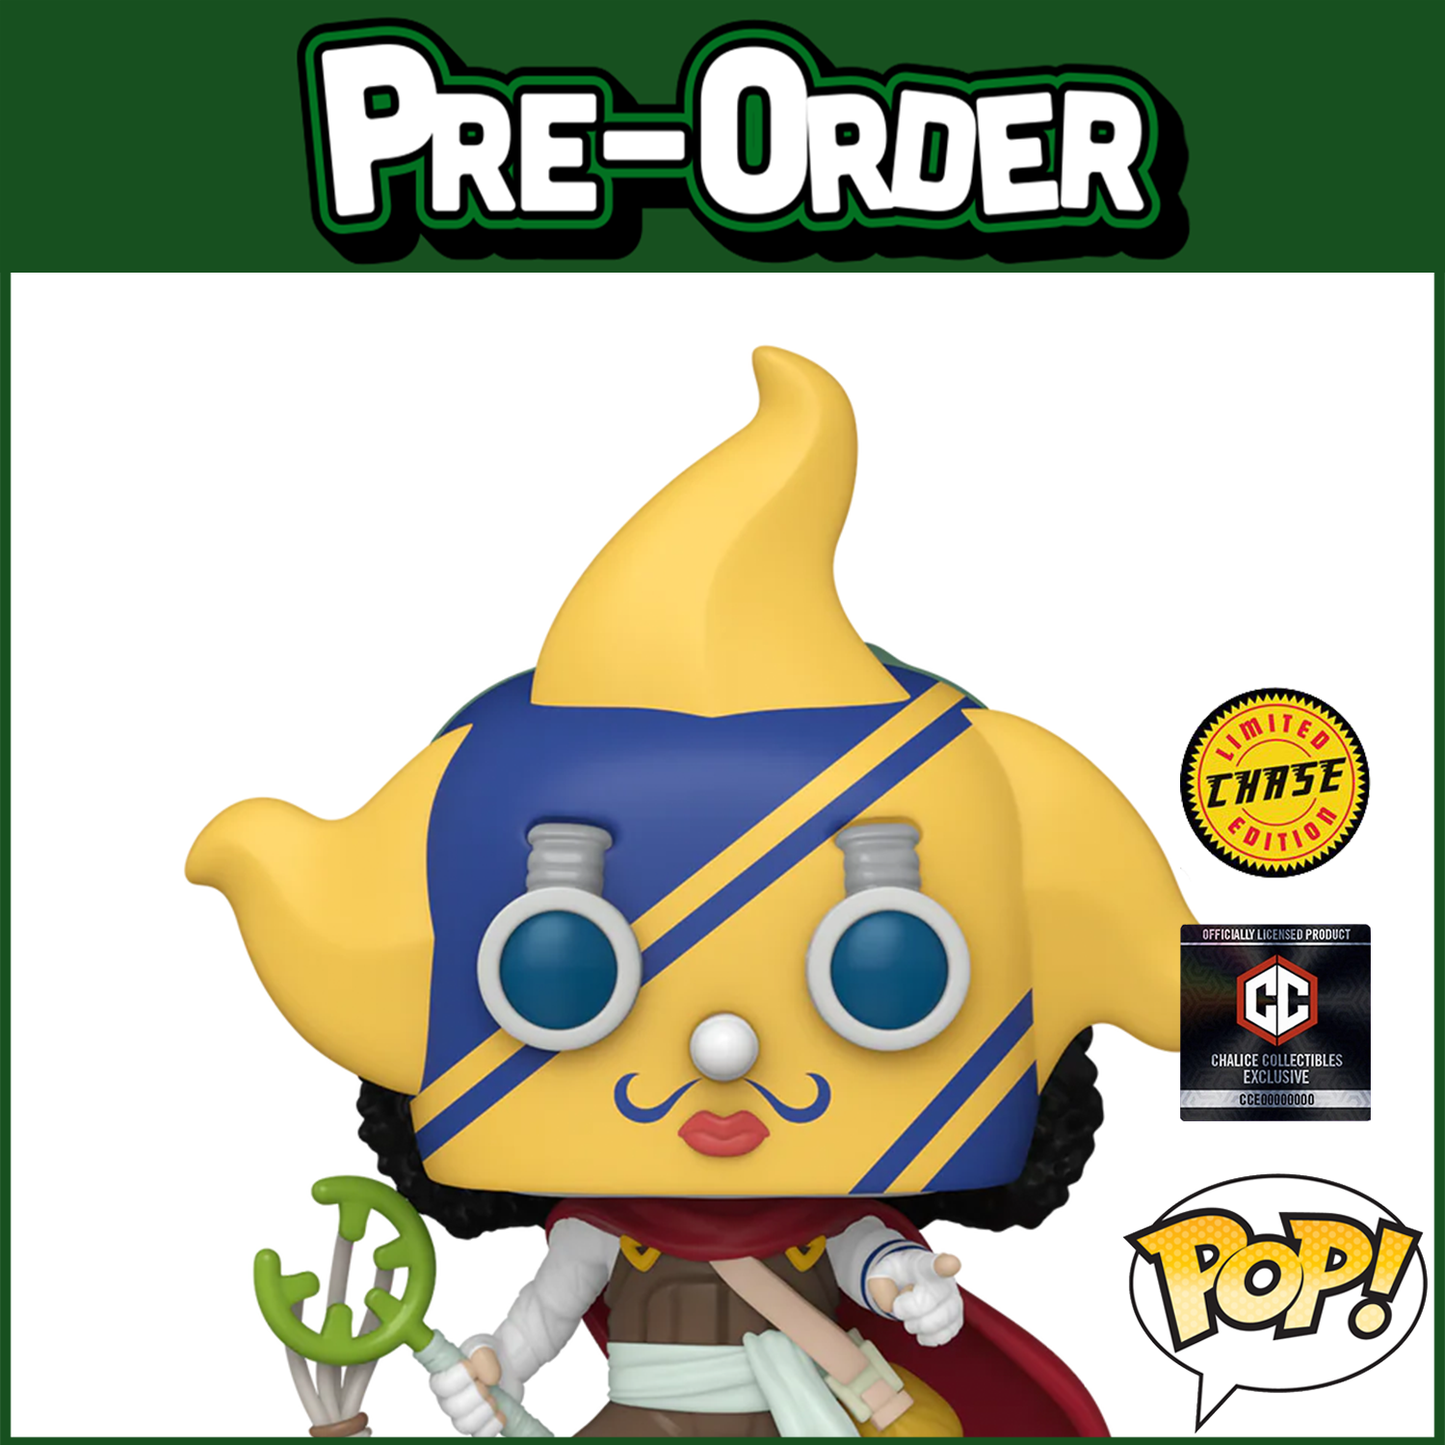 (PRE-ORDER) Funko POP! Animation: One Piece - Sniper King CHASE (Chalice Collectibles) #1514